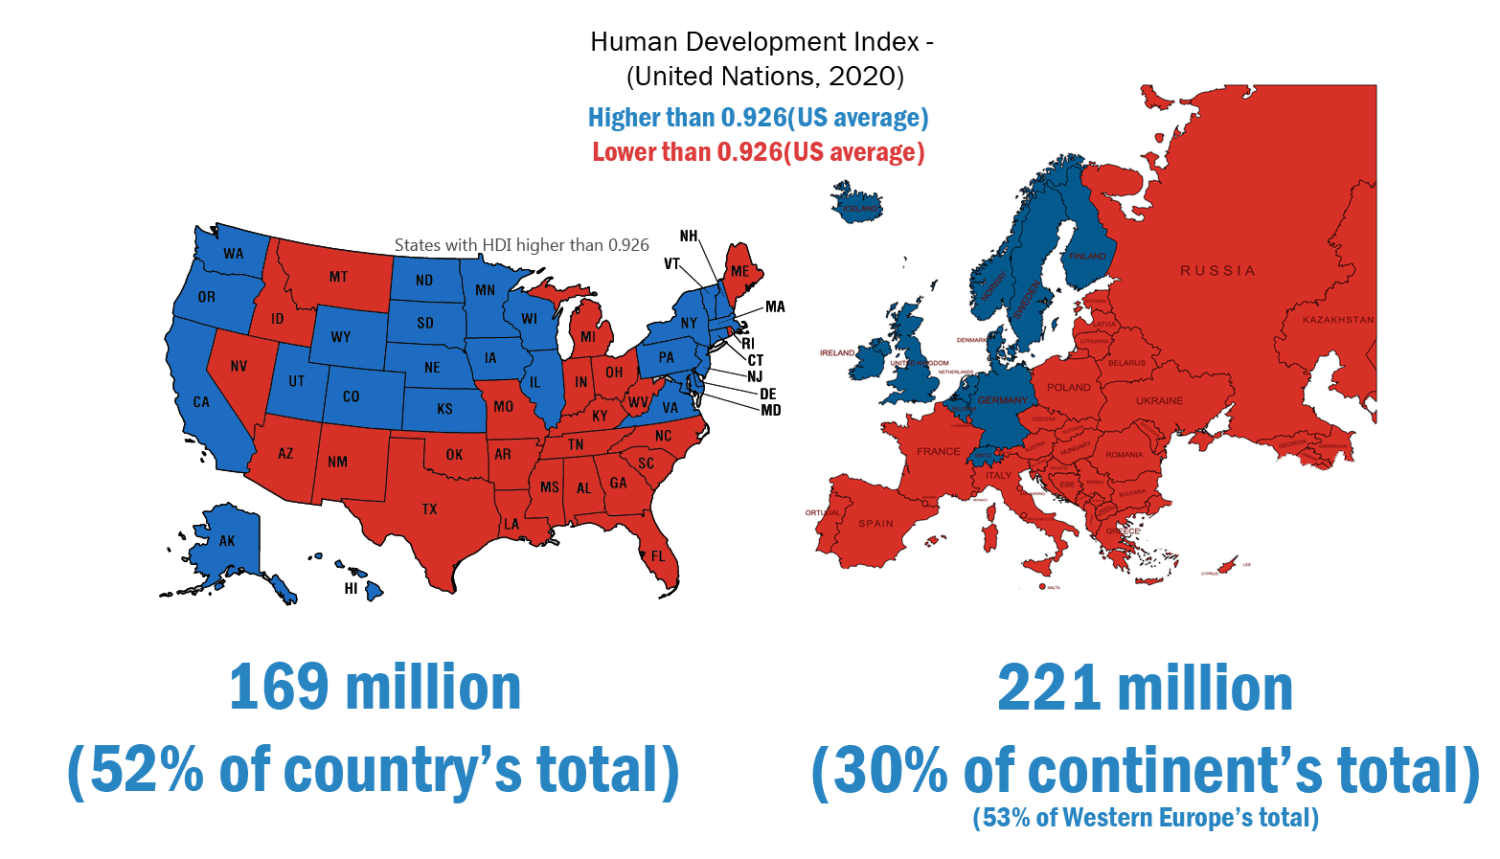 Europeans countries with higher HDI than USA average.